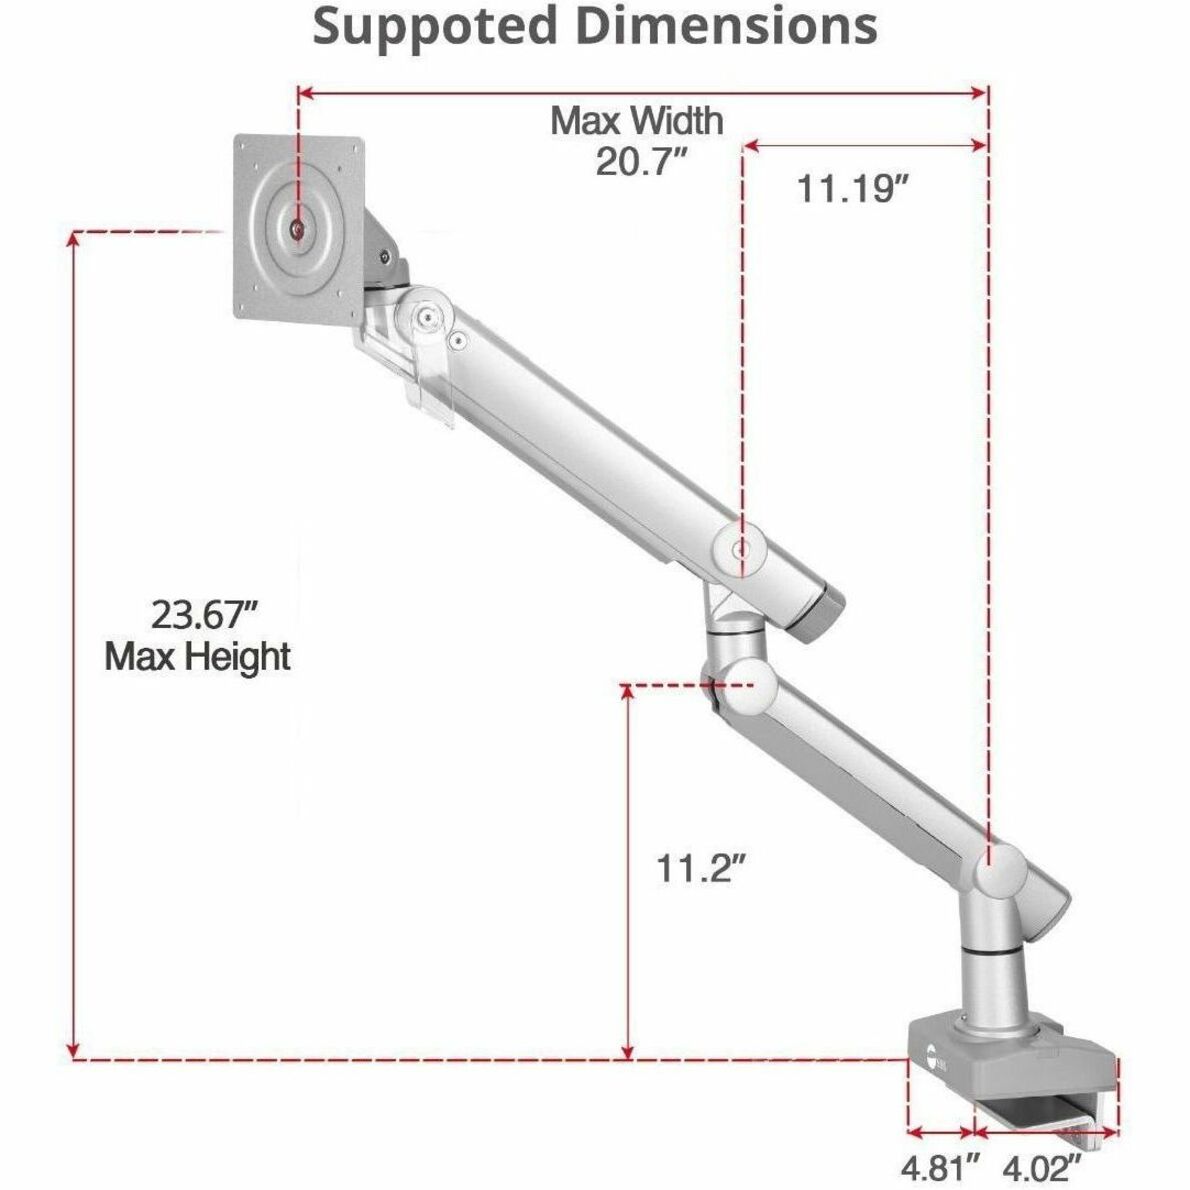 SIIG CE-MT3V11-S1 Heavy Duty Desk Mount Single Monitor Arm - Up to 49"